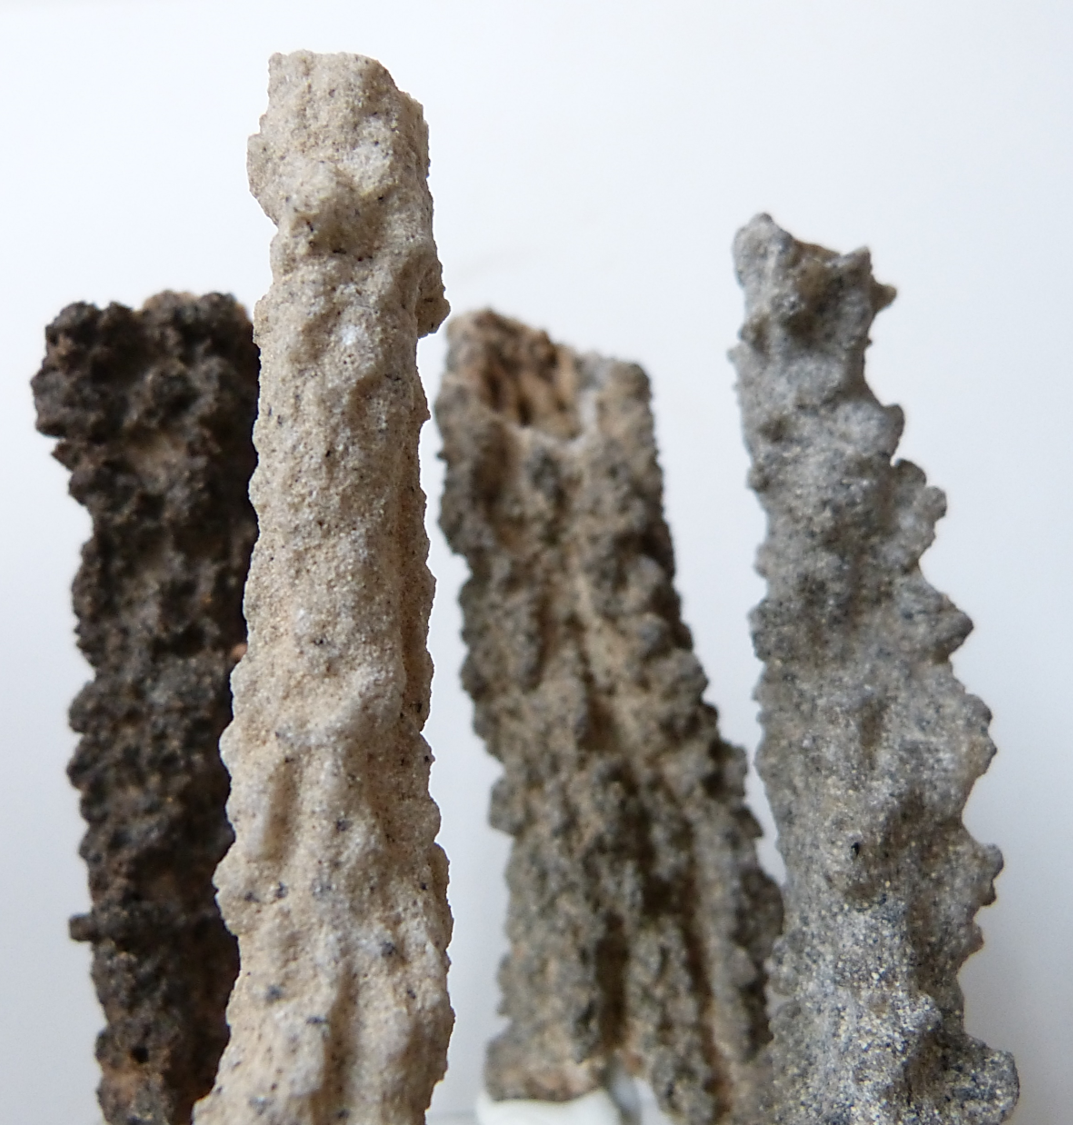 rockon-ro:
“ FULGURITES from Morocco. A fulgurite is a hollow, tubular piece of fused sand caused by a lighting strike to the ground. They are hollow and lined with melted sand grains and generally less than an inch or two in diameter ( a lighting...